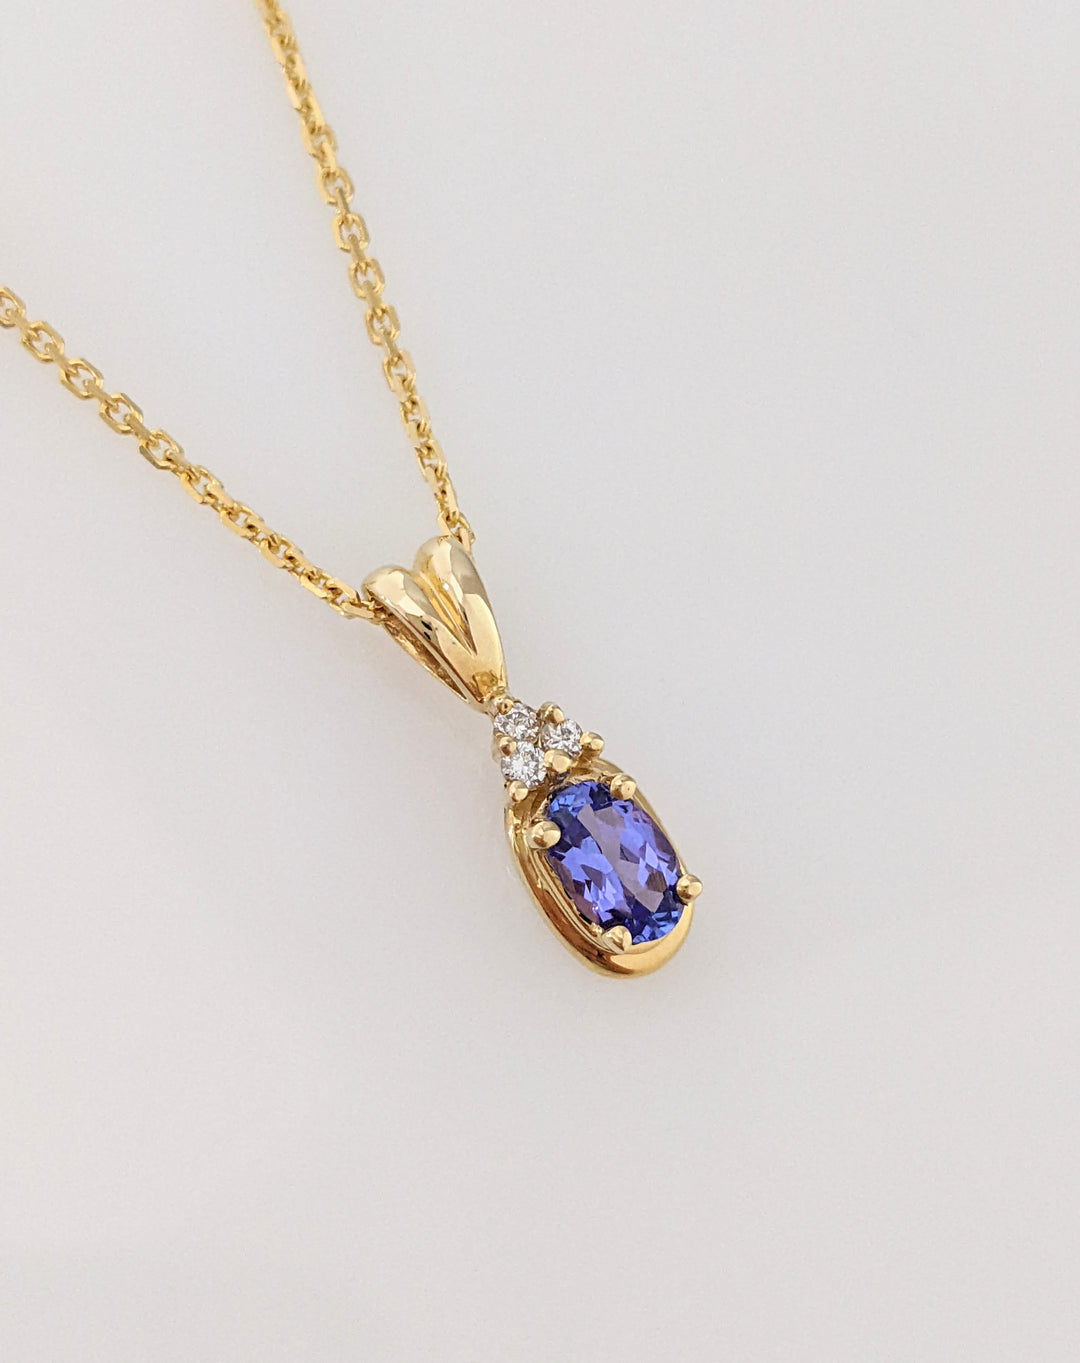 14K TANZANITE OVAL 4X6 WITH (3) MELEE ESTATE 3.6 GRAMS